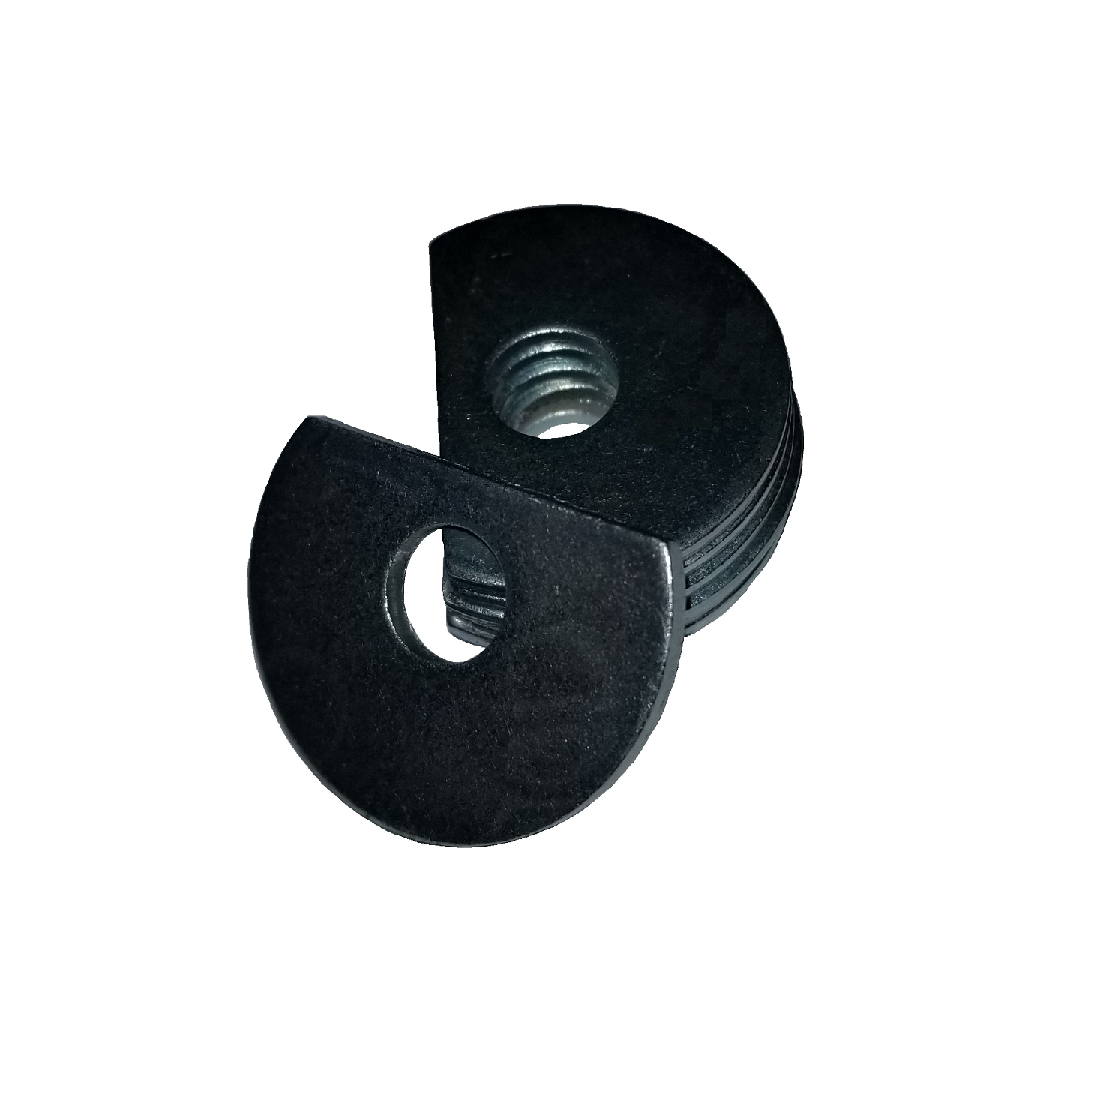 Clipped OD Washer - 0.500 ID, 1.625 OD, 0.100 Thick, Spring Steel - Hard, Zinc & Yellow